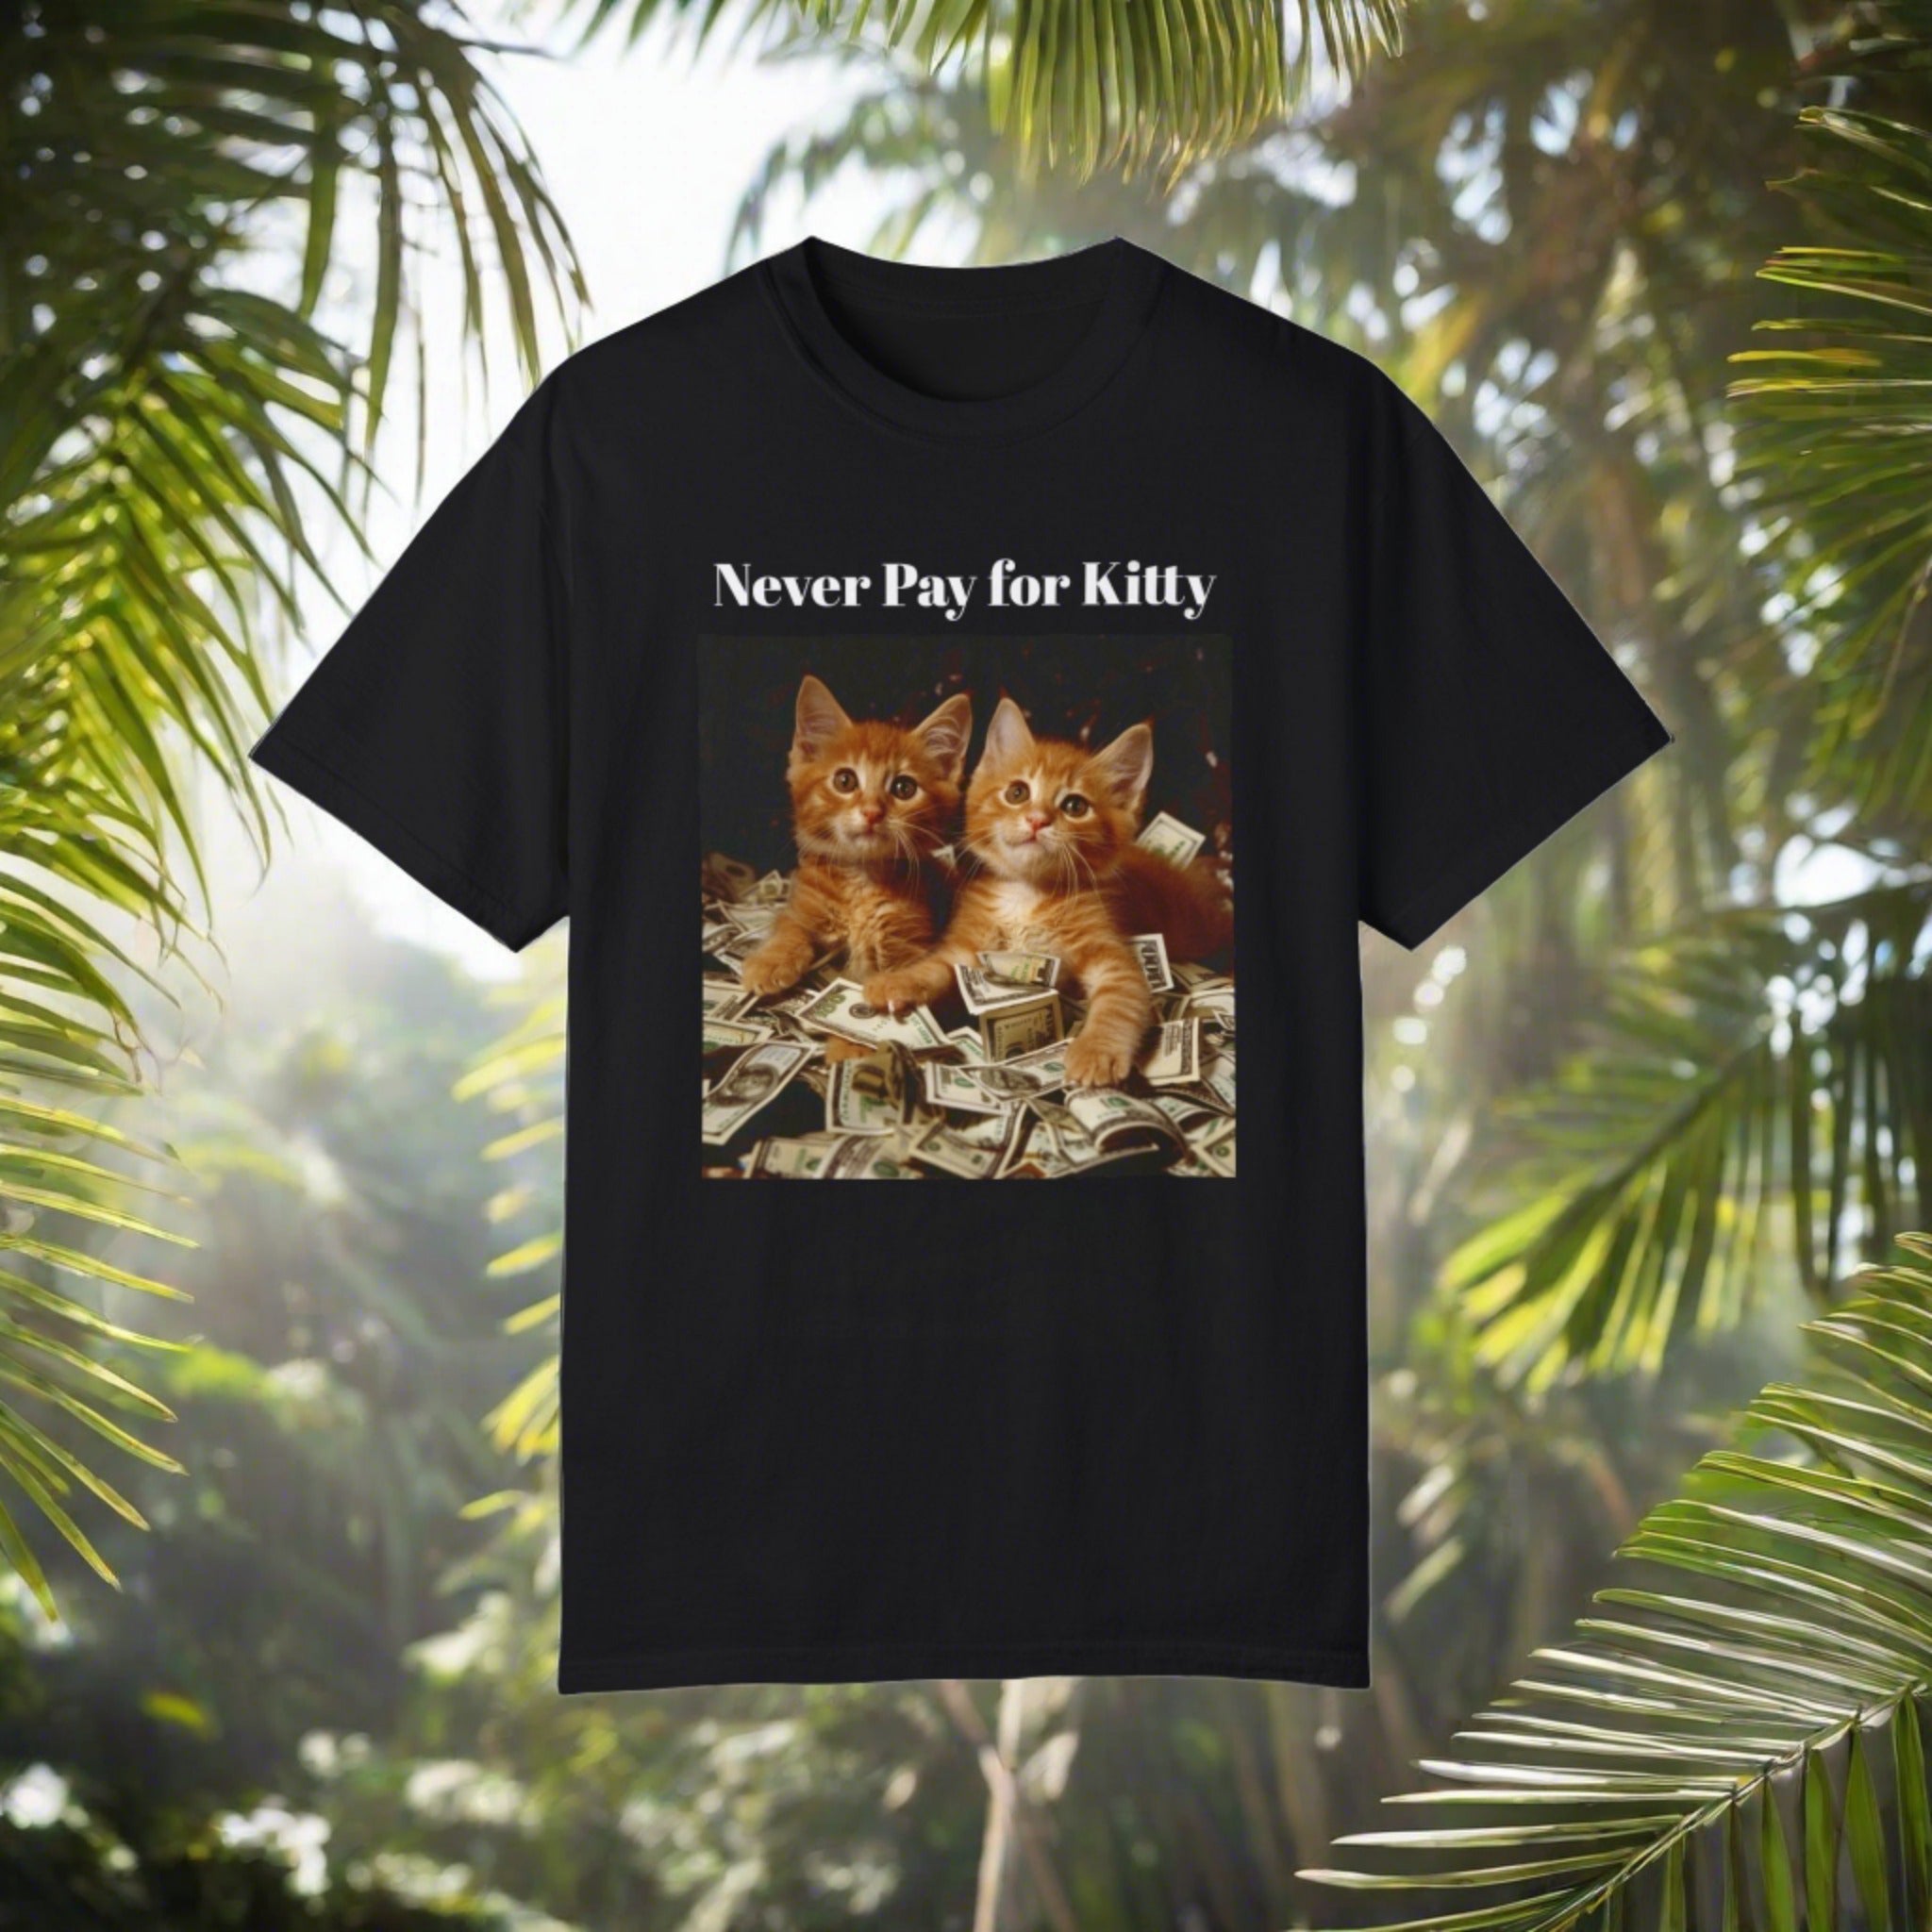 The image displays a unisex garment-dyed t-shirt in a chic, subdued color. The front graphic shows cute kittens frolicking in a pile of cash, beneath the bold caption "Never Pay for Kitty." The casual cut and vintage wash of the tee highlight its laid-back yet fashionable appeal, making it perfect for those who enjoy a pun with their fashion